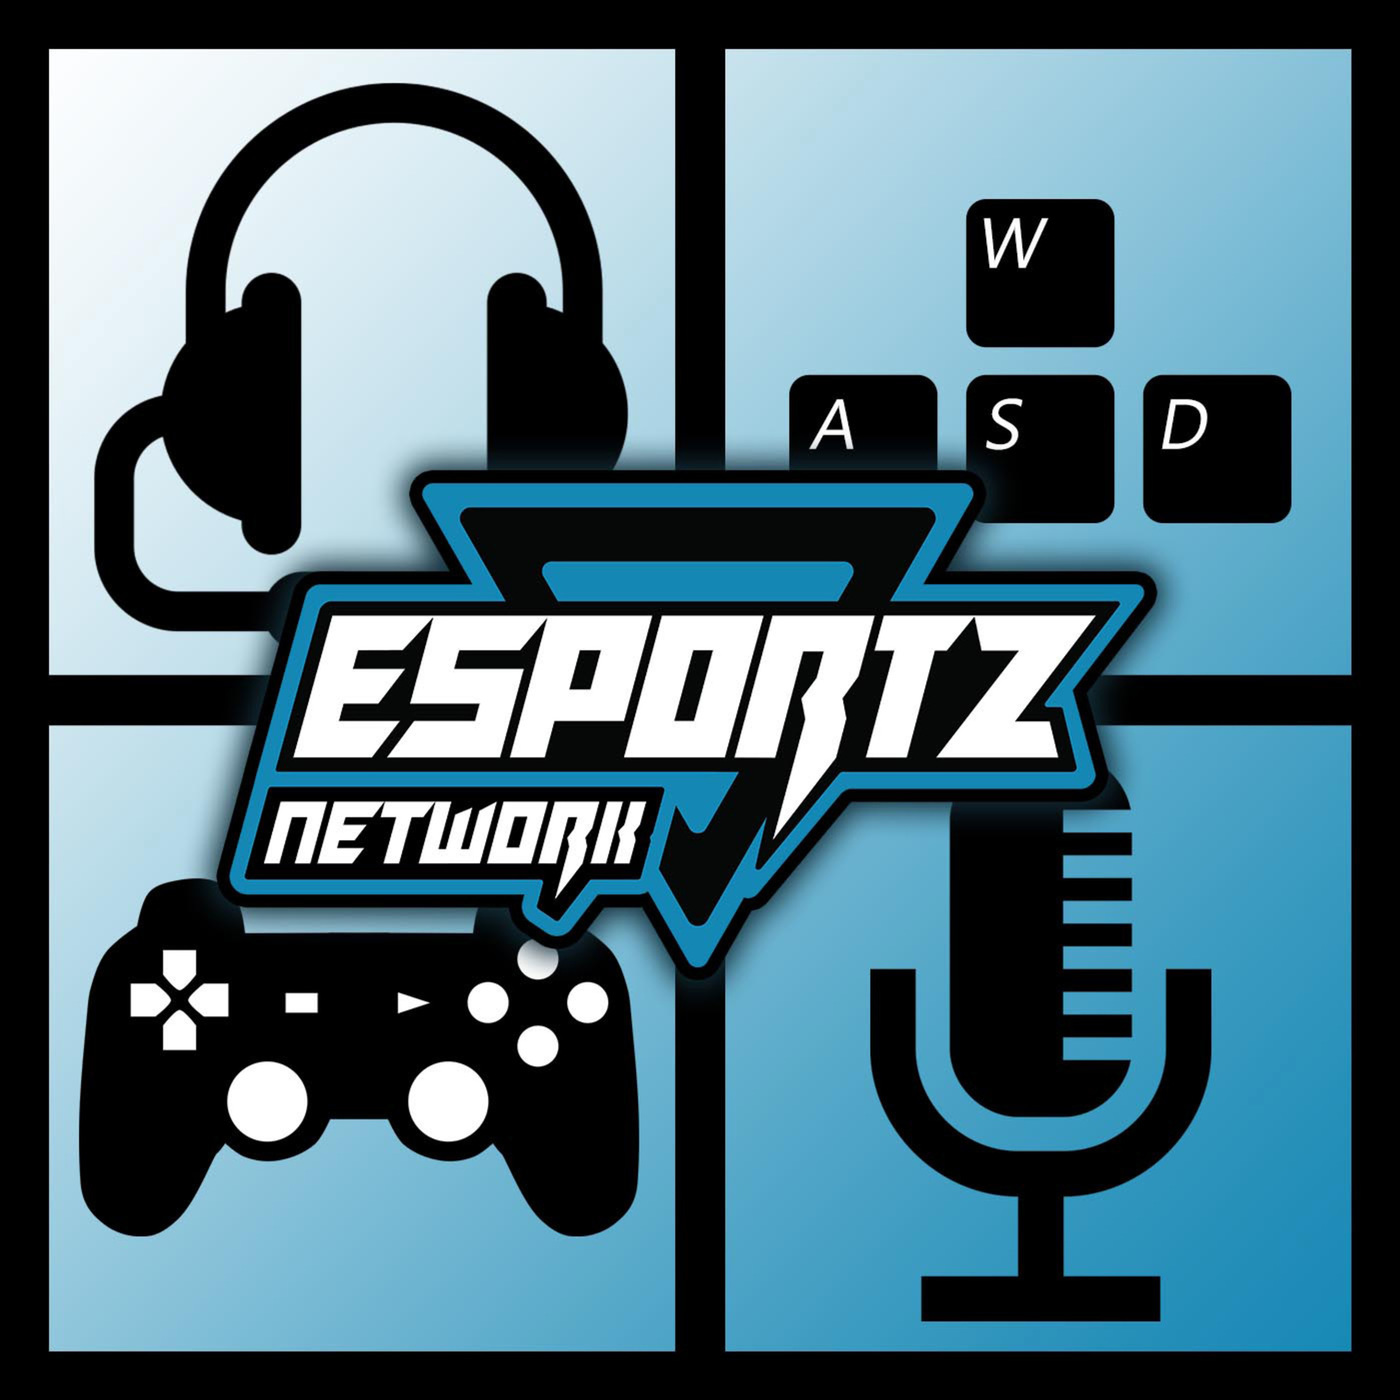 Esports Network Podcast: Joining Forces: Wisdom Gaming & Mall of America  ft. Nicole Du Cane, VP Sales/Partnerships, Wisdom Gaming